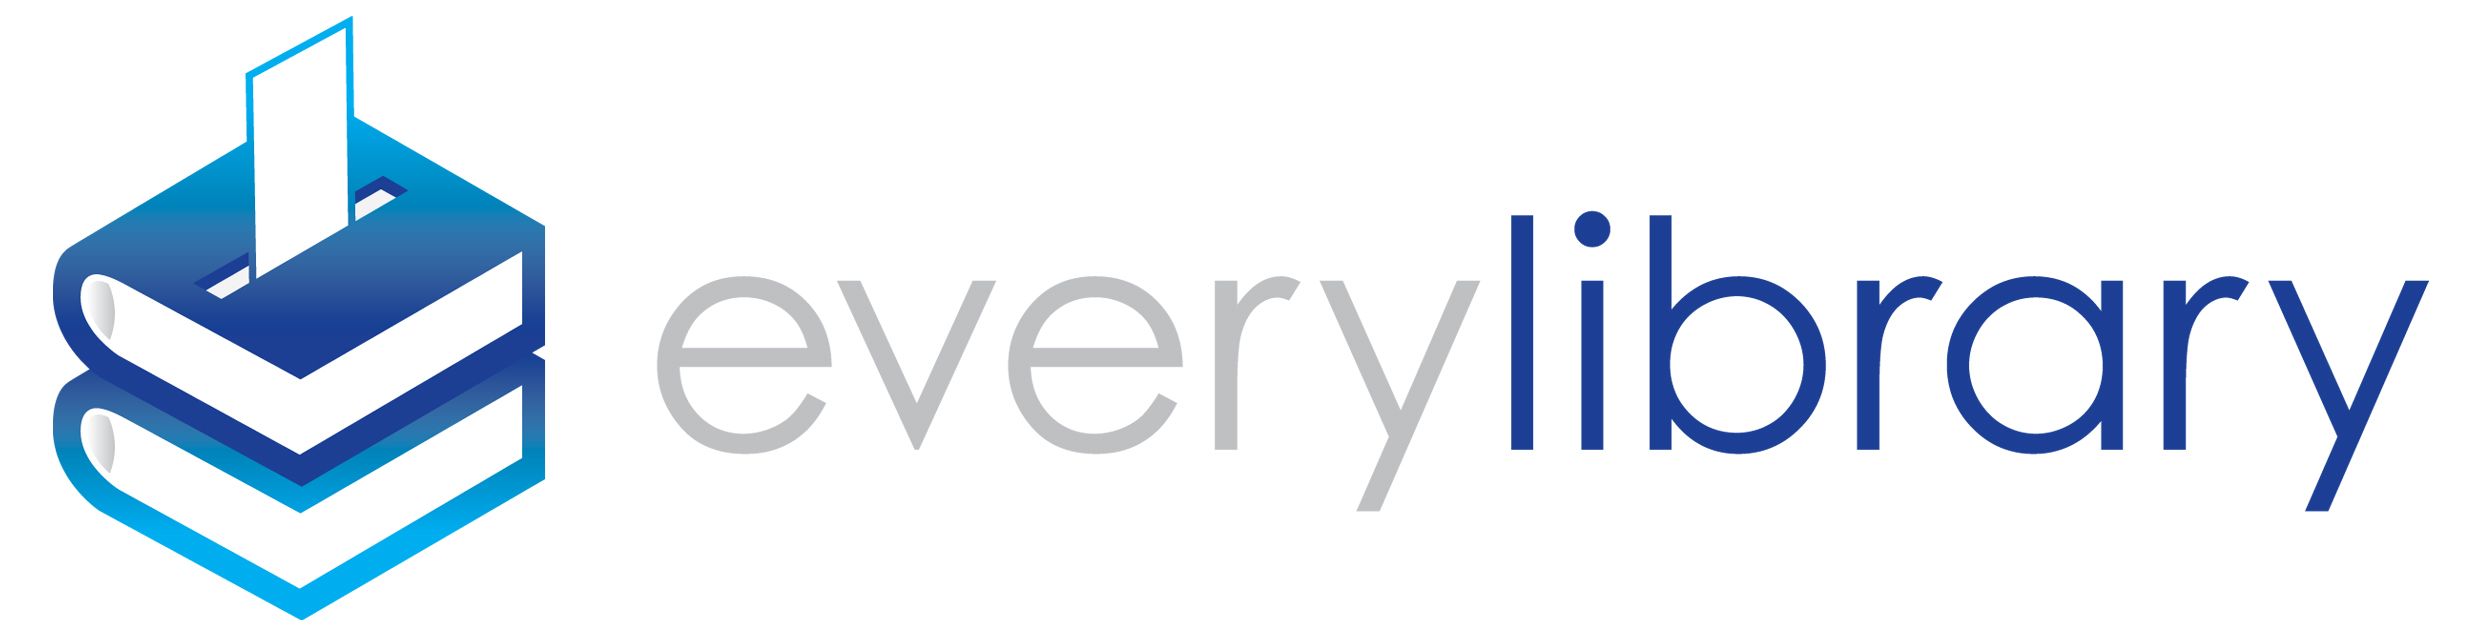 every library logo